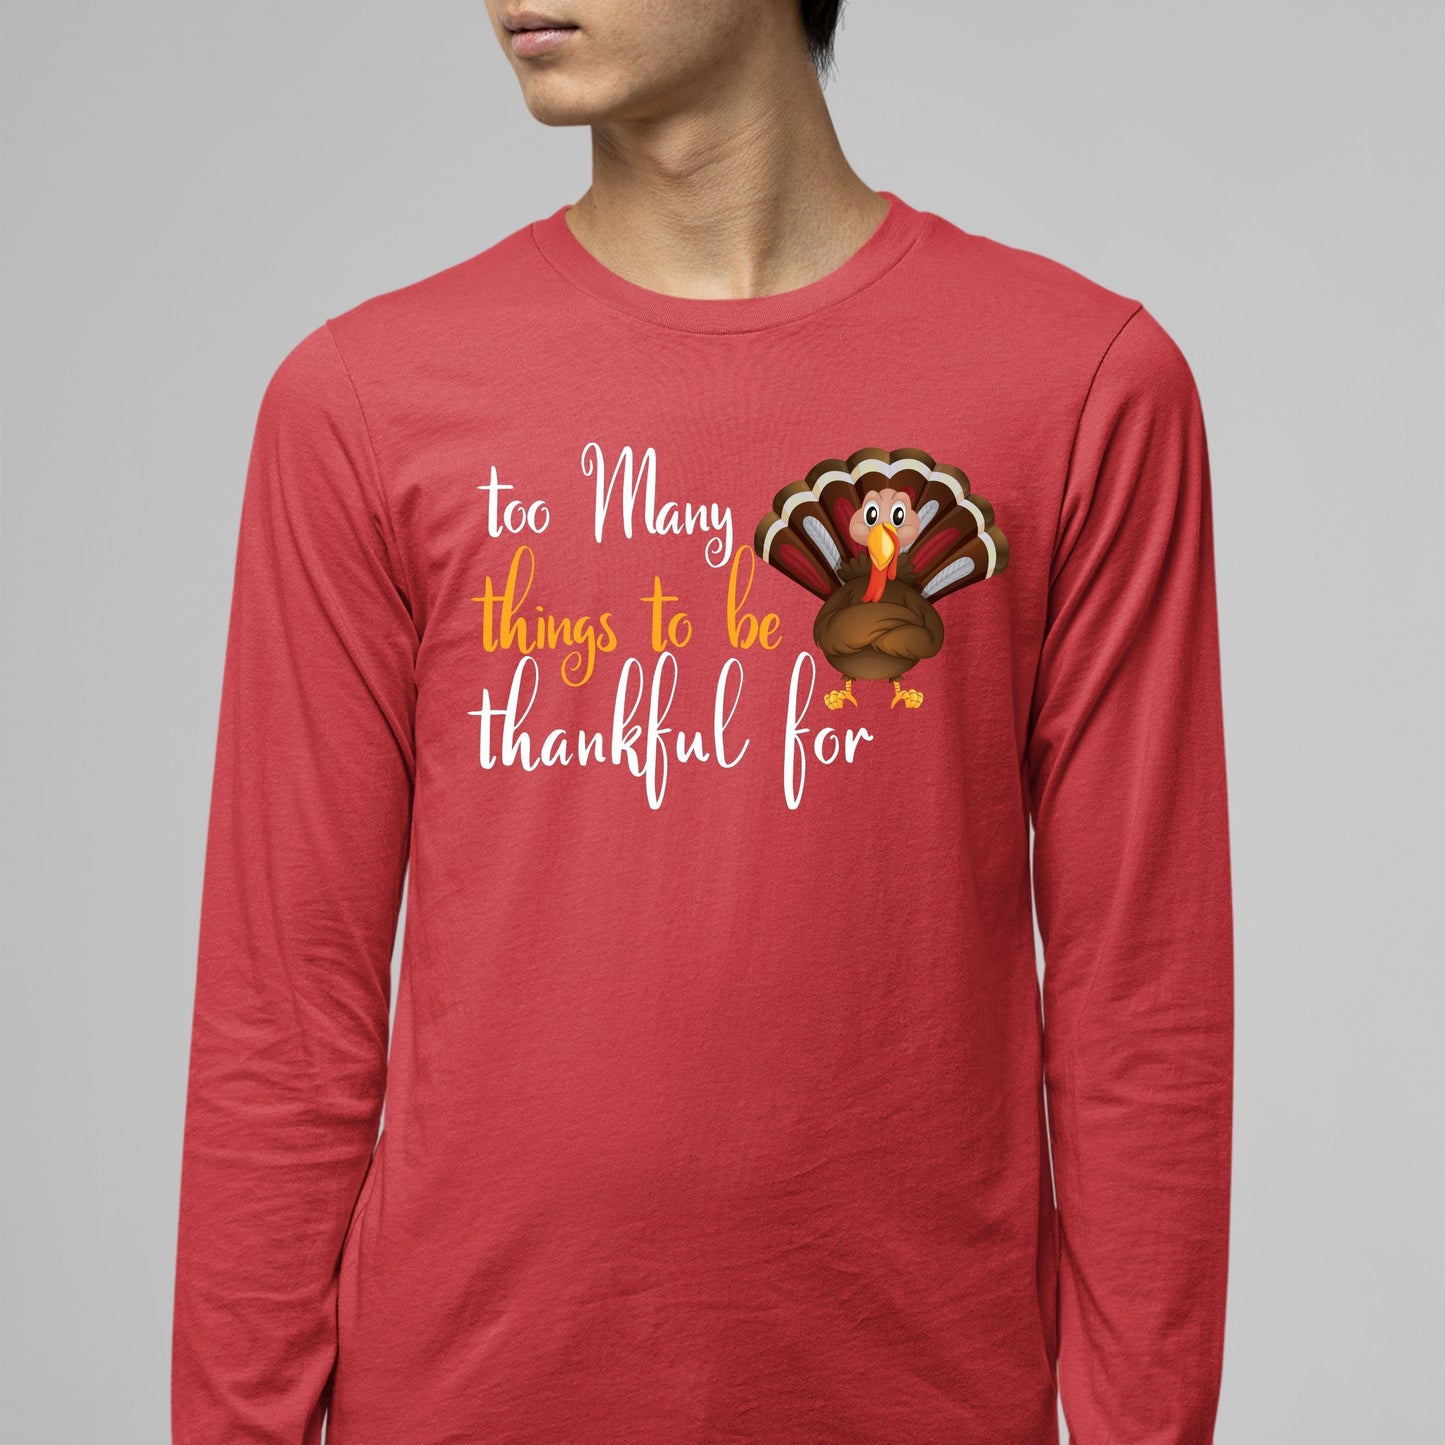 Too Many Things To Be Thankful For, Thanksgiving Sweatshirt, Thanksgiving Sweater for Men, Thanksgiving Gift Ideas, Cute Thanksgiving